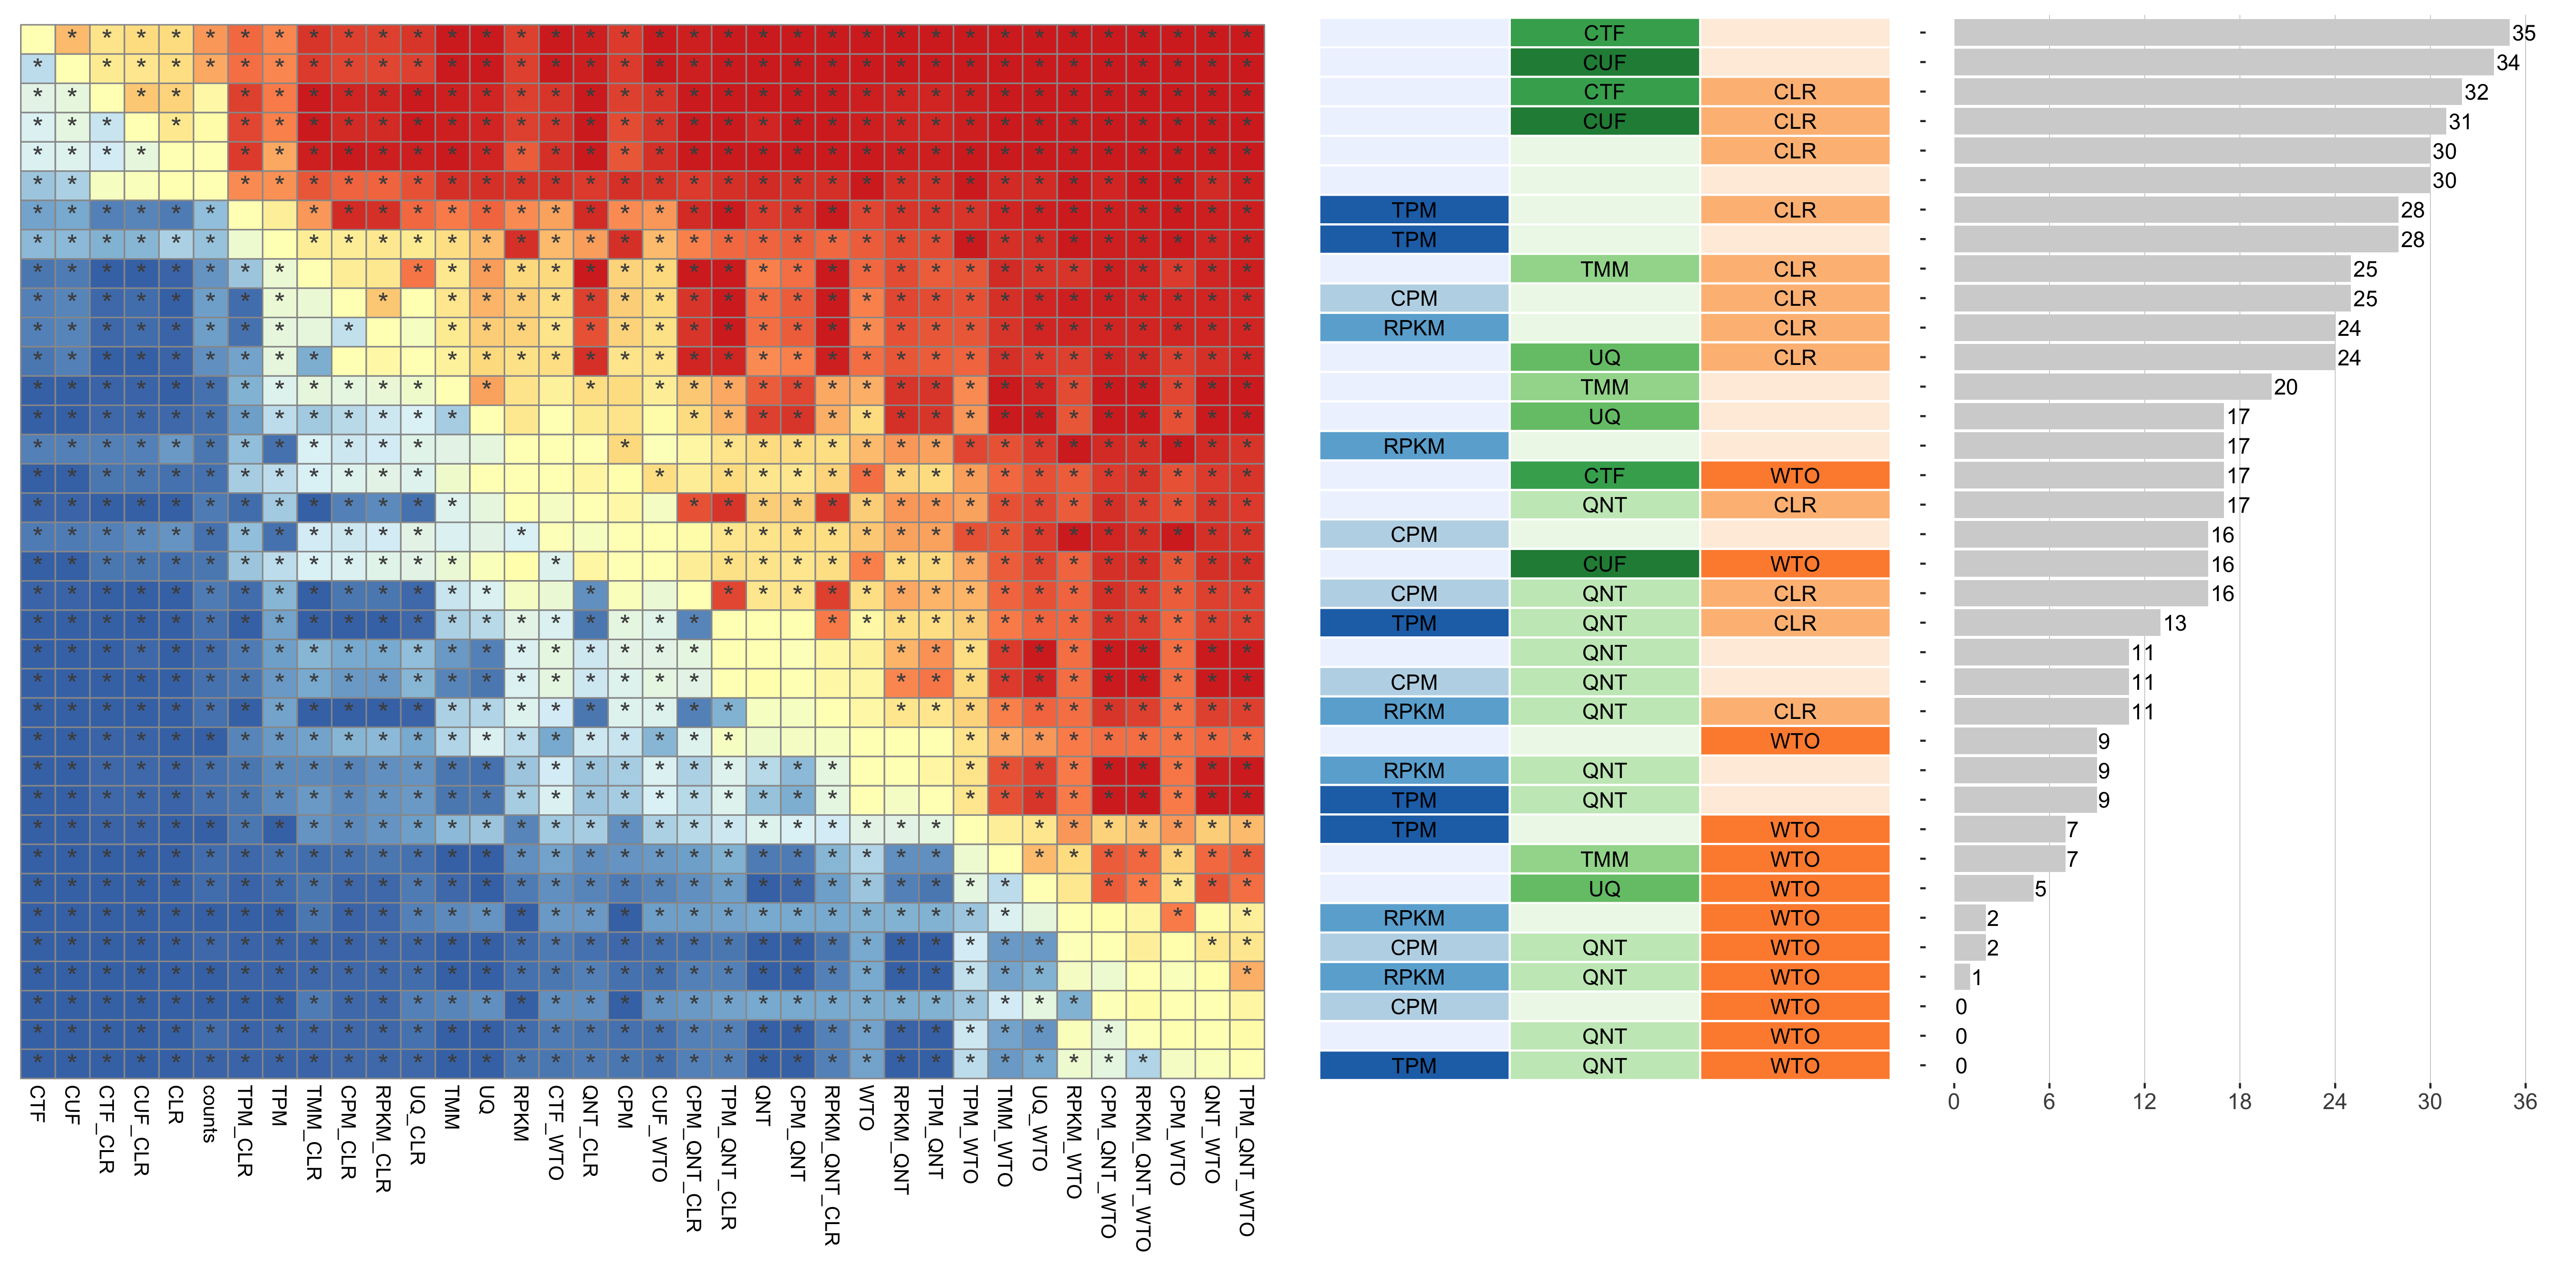 **Dataset-level pairwise comparison of workflow performance.** (**left**) The heatmap shows the relative performance of a pair of workflows, corresponding to a row and a column, directly compared to each other for the resampled GTEx datasets of a given sample size based on the tissue-naive gold standard. The color in each cell (row, column) represents the proportion of datasets for which the workflow along the row has a higher log2(auPRC/prior) than the workflow along the column. Comparisons that are statistically significant (corrected p < 0.01) based on a paired Wilcoxon test are marked with an asterisk. (**middle**) The workflows (rows) are described in terms of the specific method used in the within-sample normalization (blues), between-sample normalization (greens), and network transformation (oranges) stages. (**right**) The barplot shows the number of times each workflow was significantly greater than another workflow.